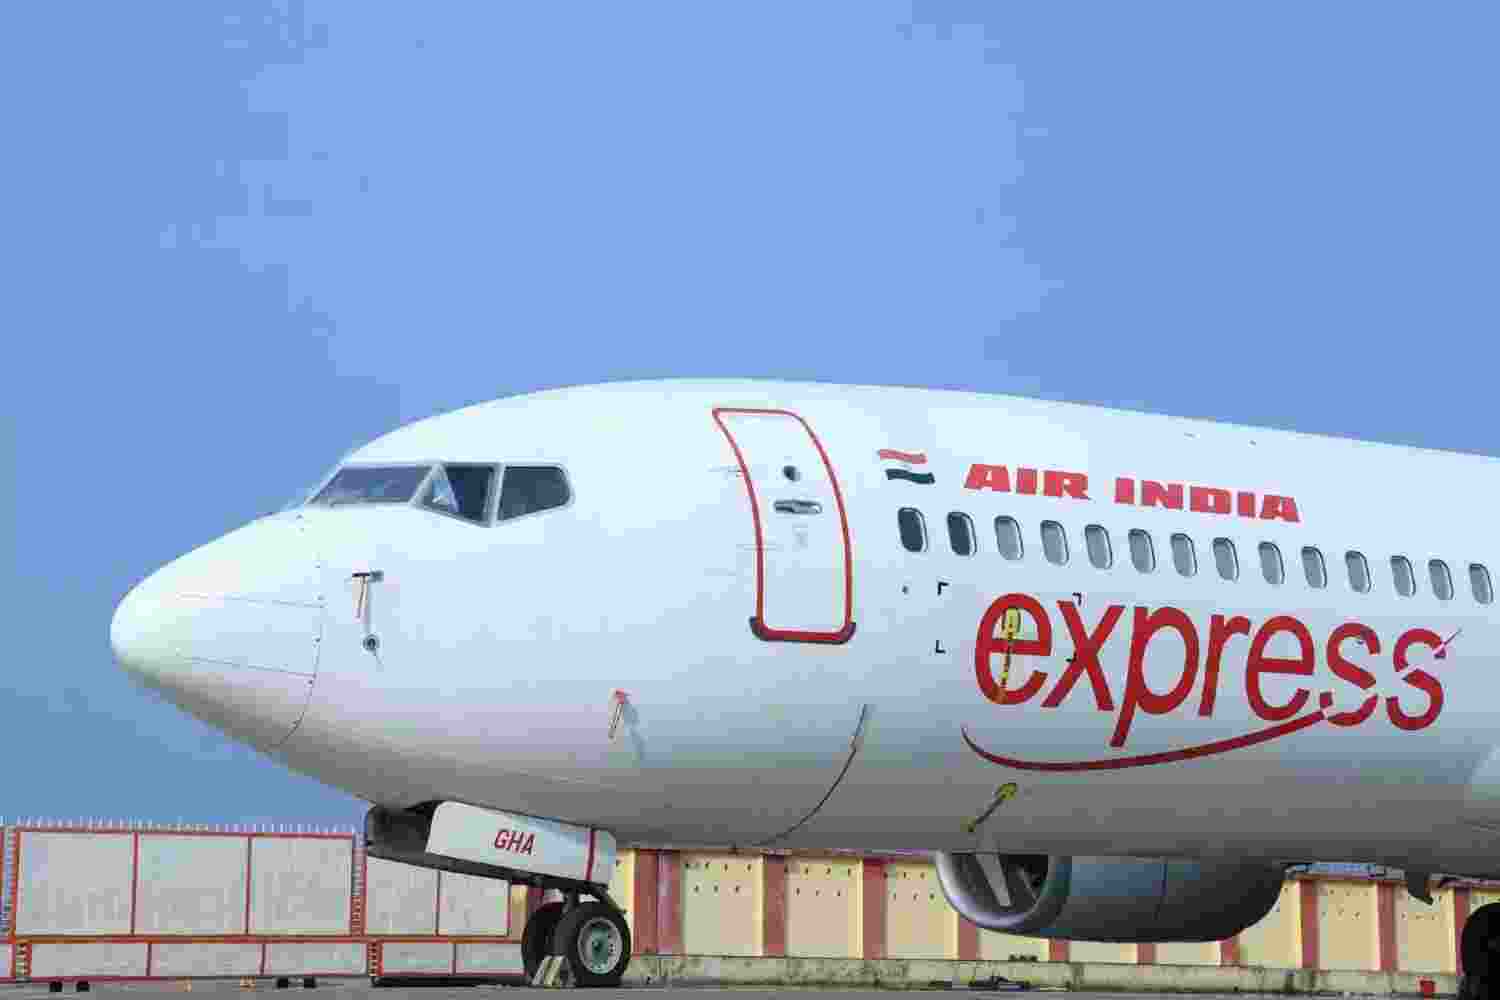 AI Express flight cancellation prevents woman from visiting ailing husband before death